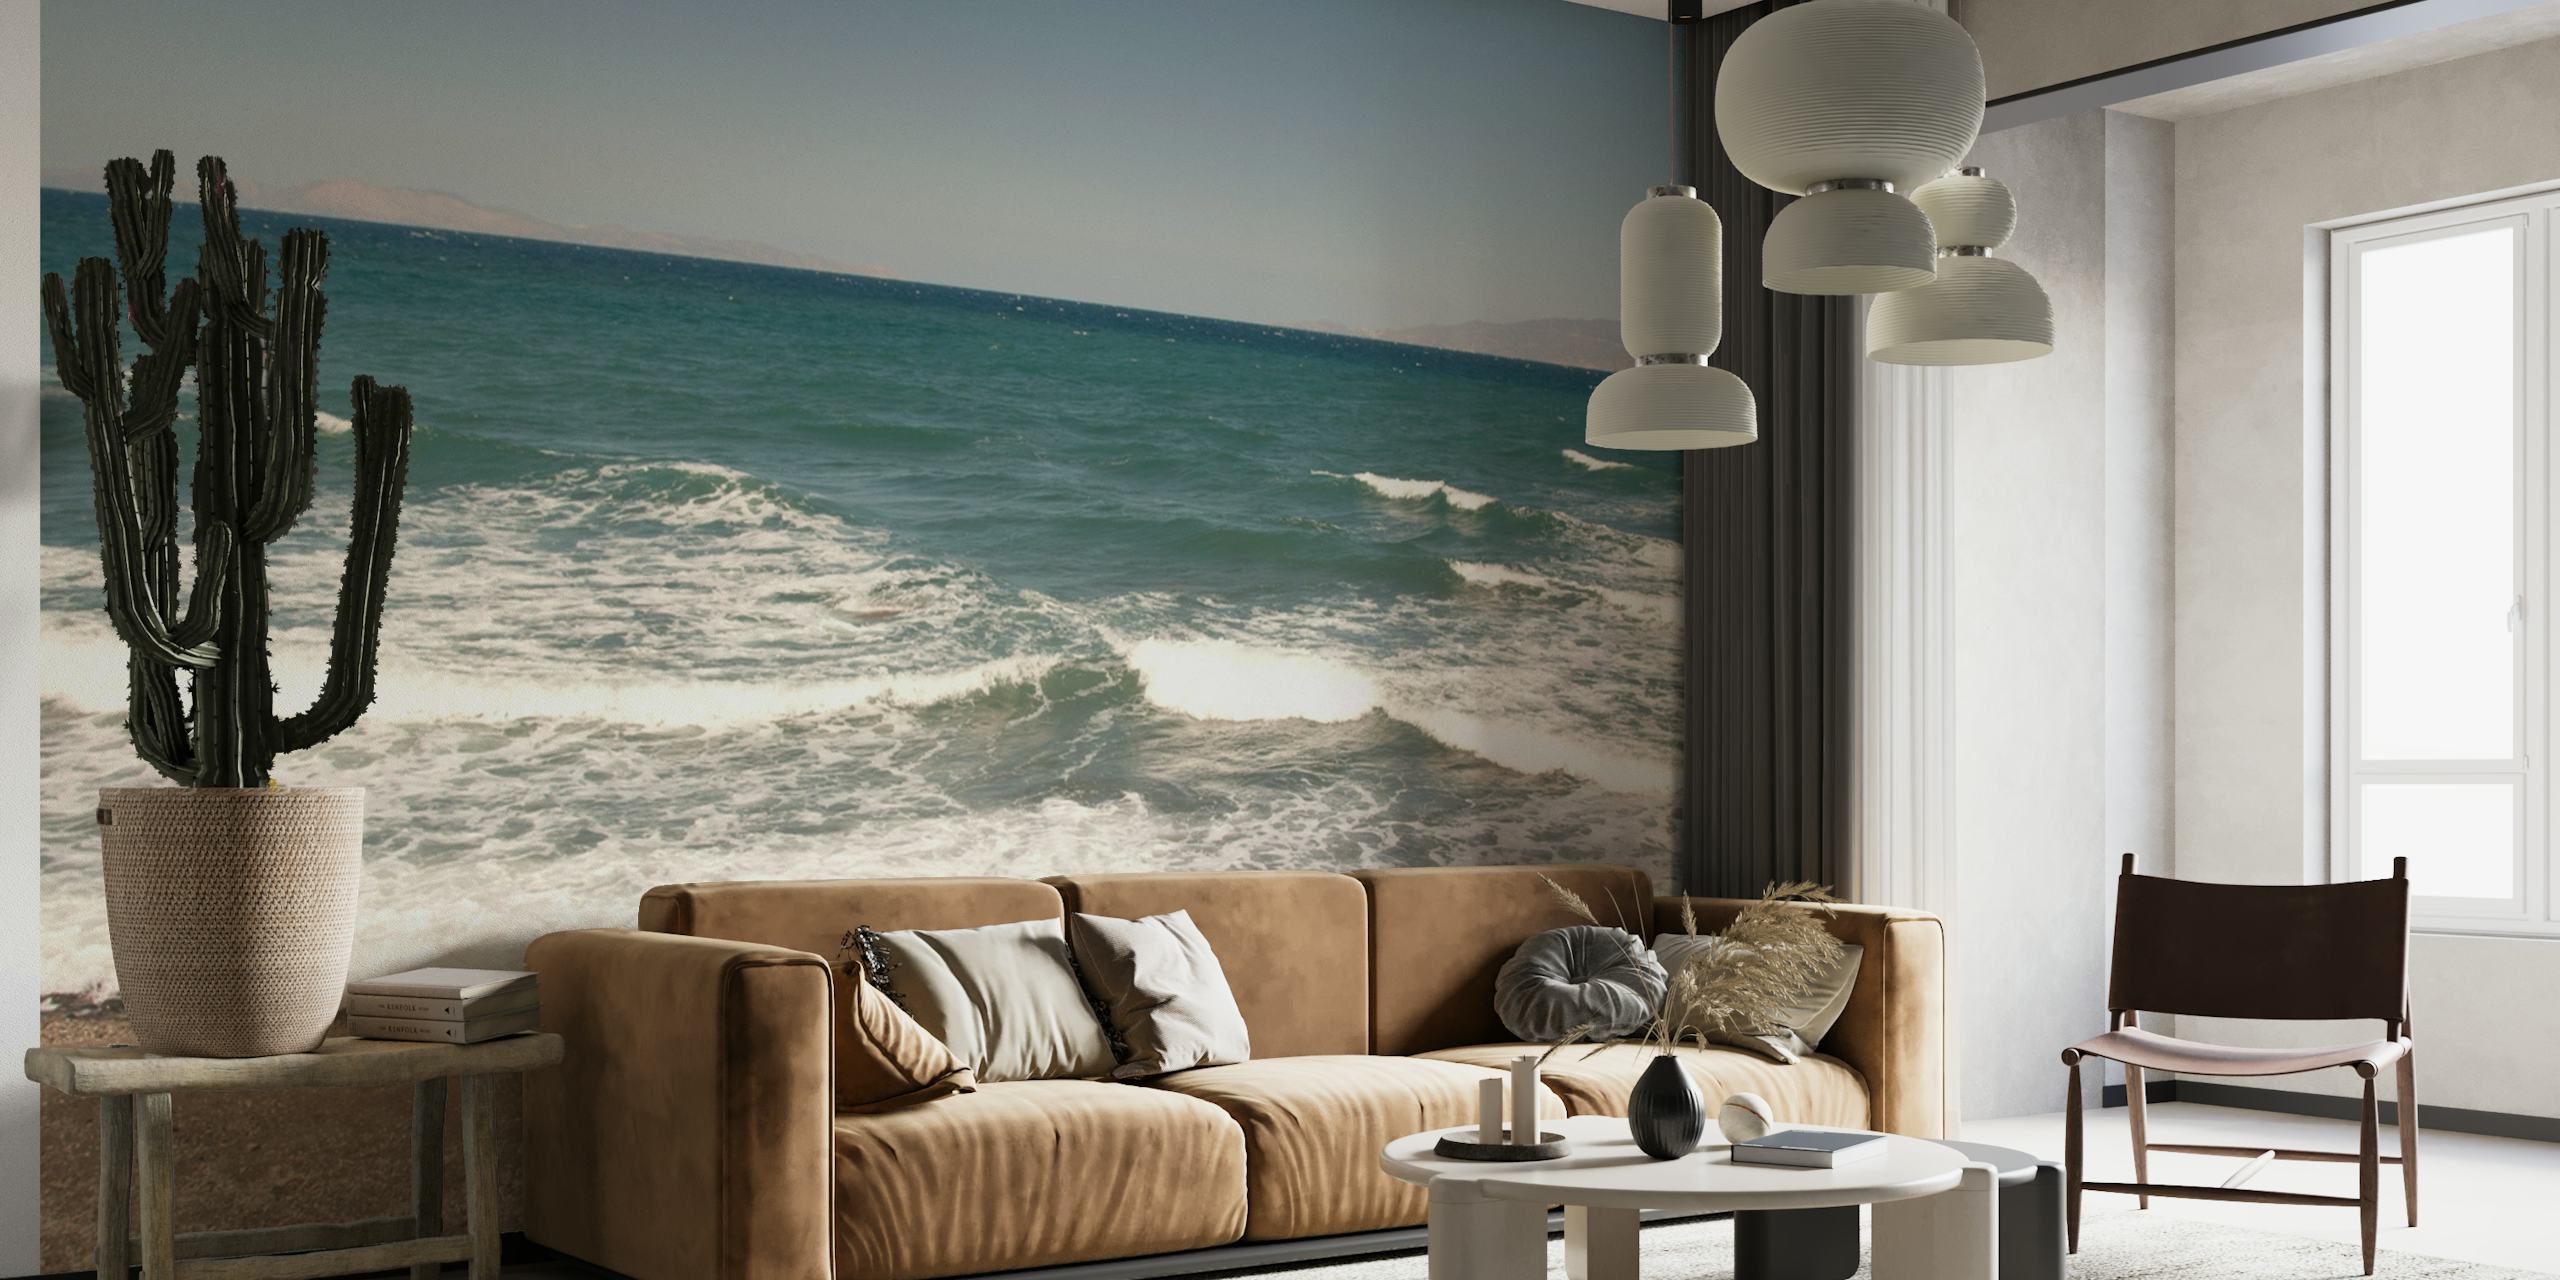 Santorini Crashing Waves wall mural with clear blue sea and foamy waves